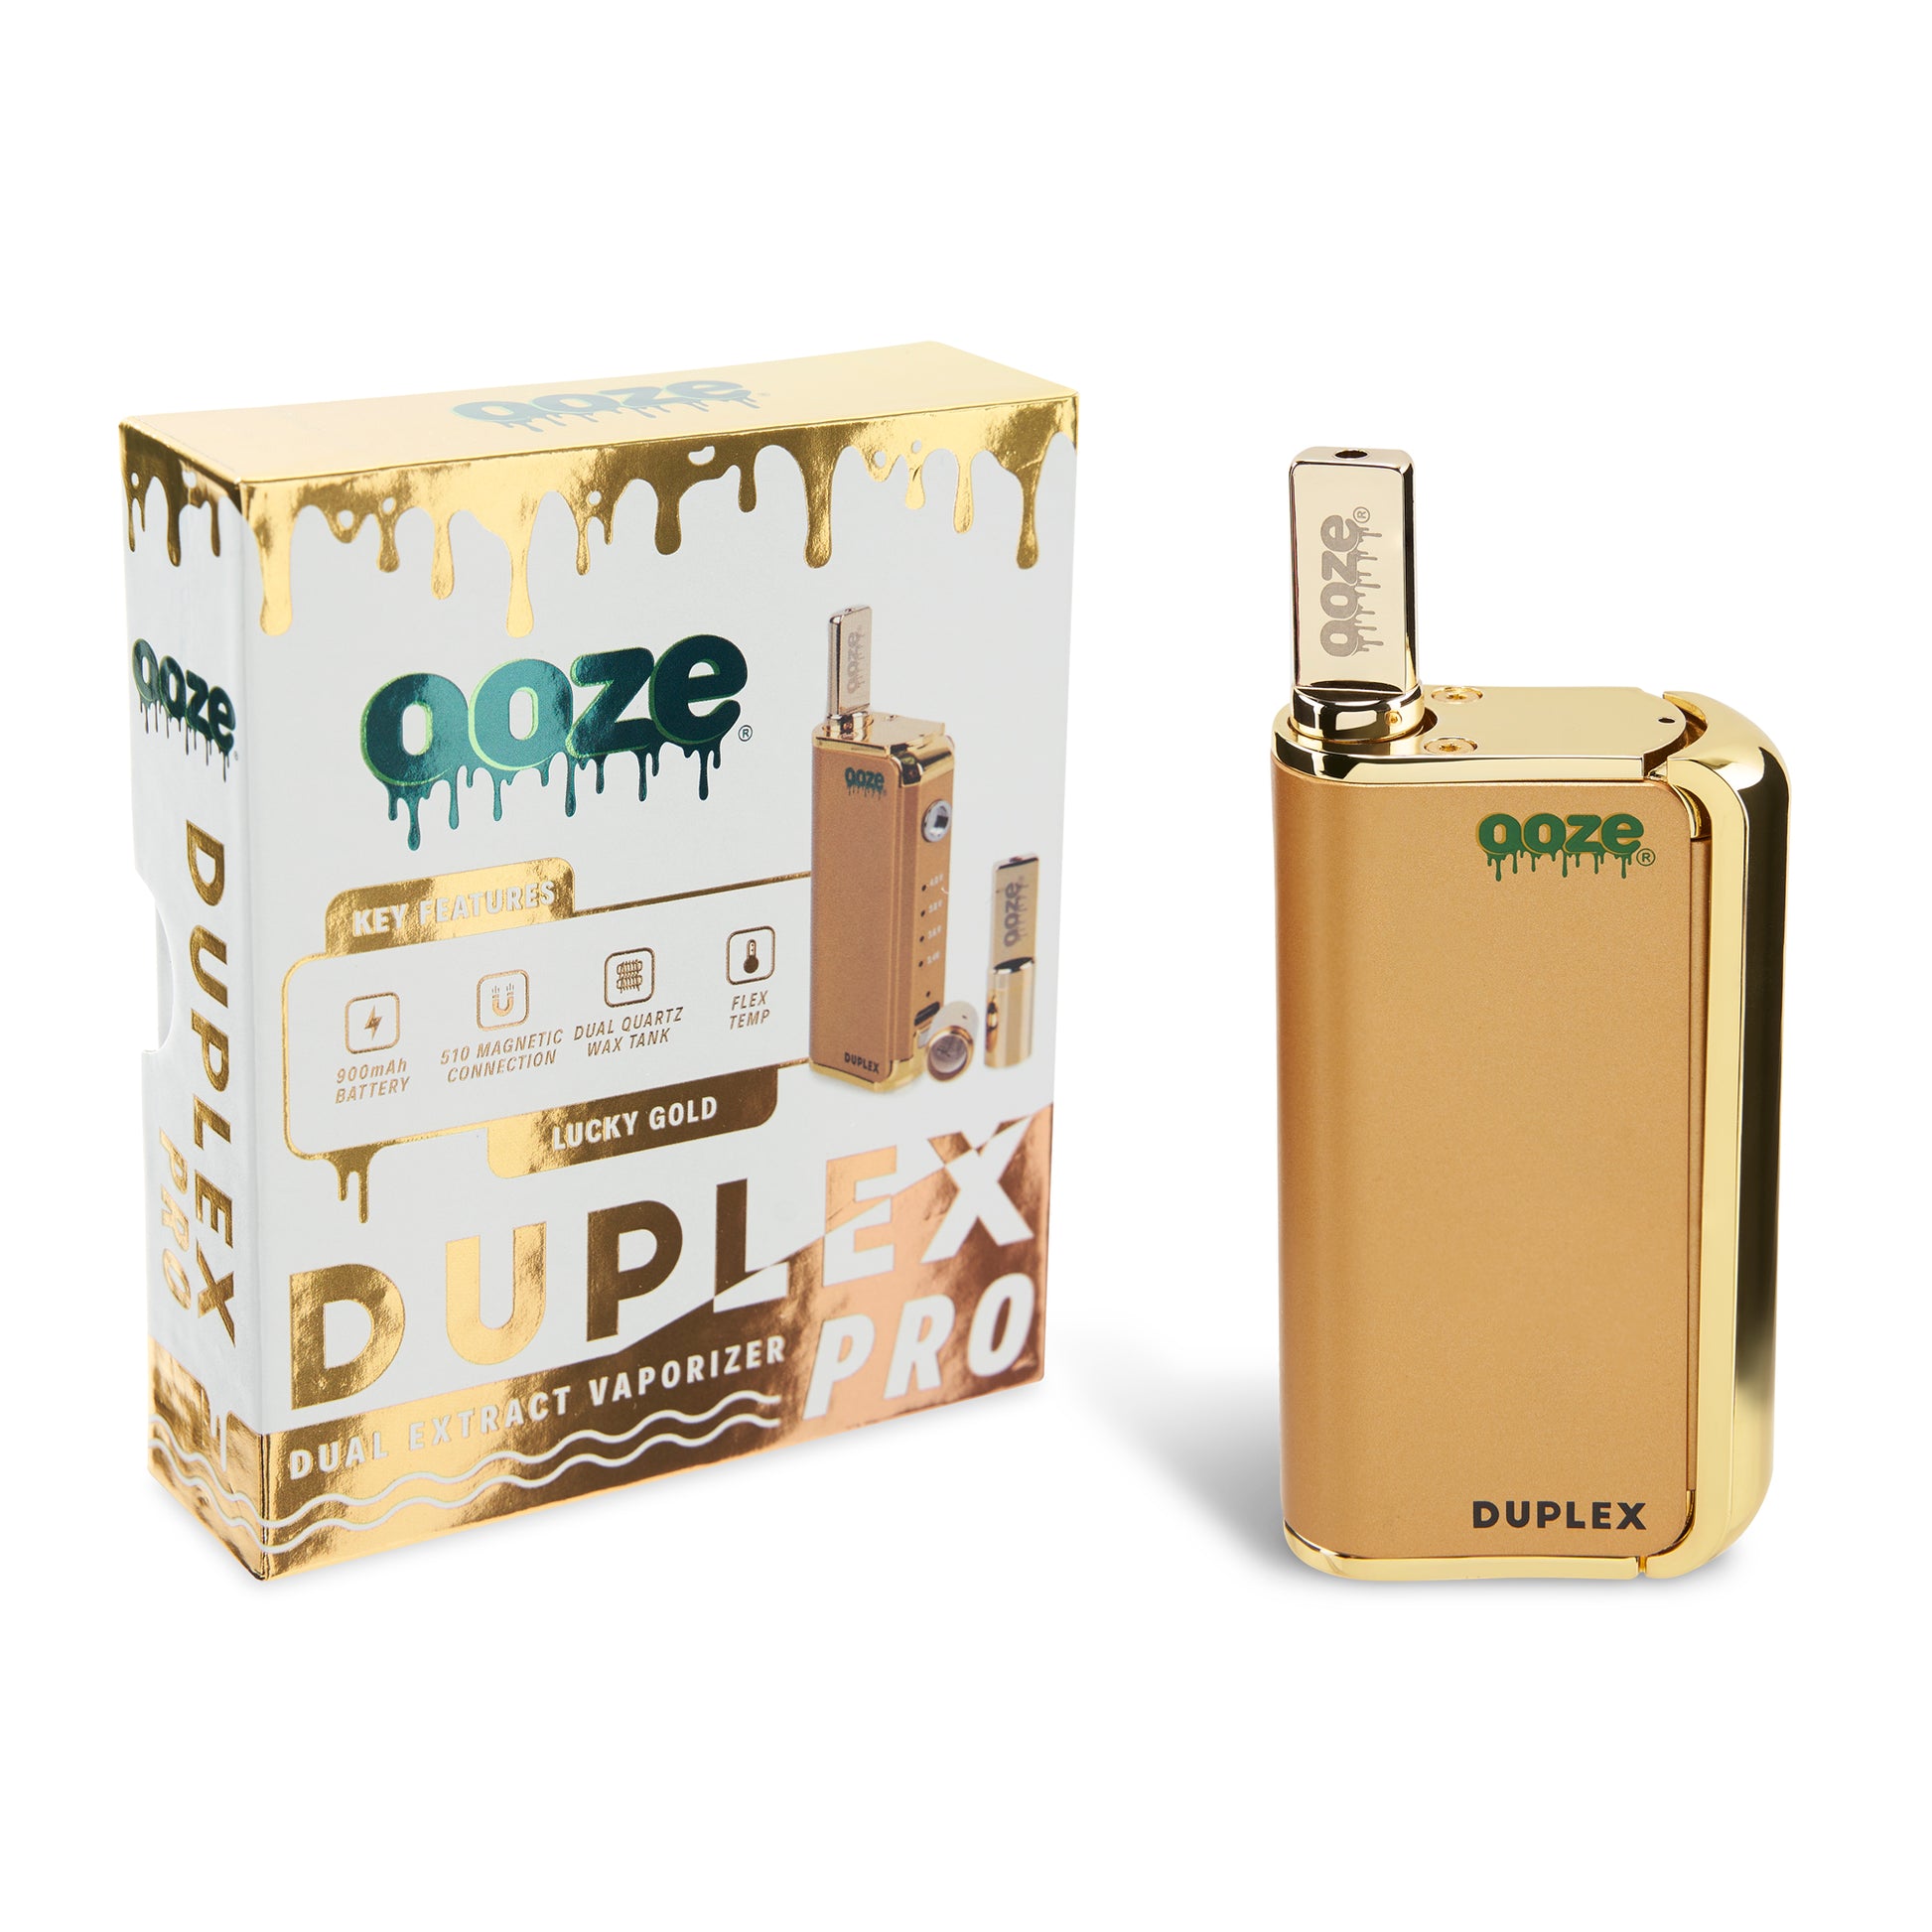 The Lucky Gold Ooze Duplex Pro Vaporizer is shown next to the packaging with the matching wax atomizer inserted.